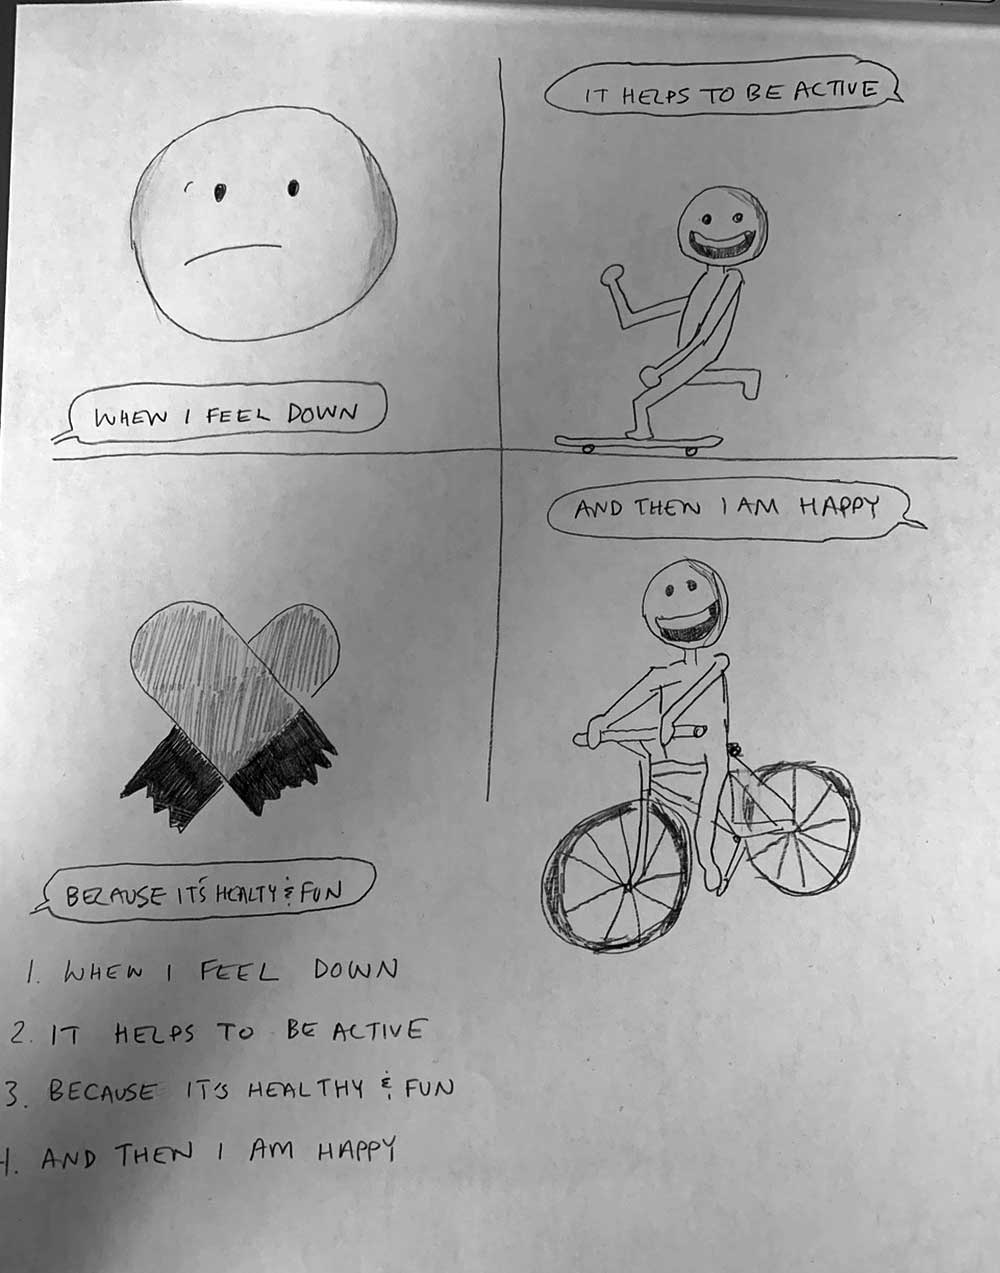 Participant’s comic: “When I feel down. It helps to be active. Because it’s healthy and fun. And then I am happy.” 